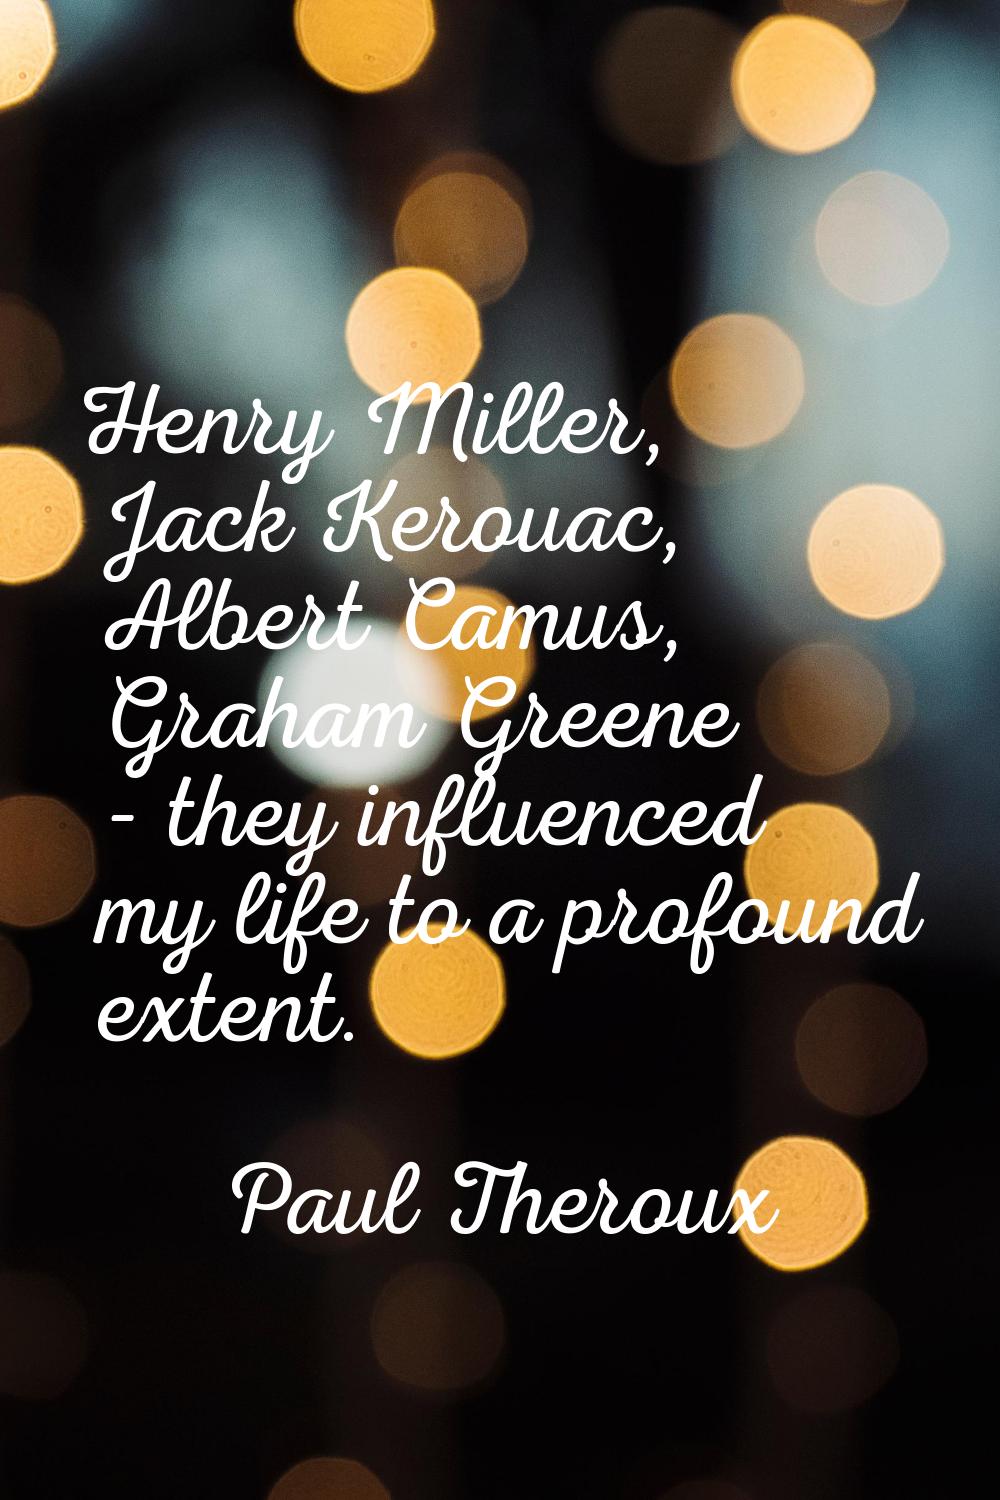 Henry Miller, Jack Kerouac, Albert Camus, Graham Greene - they influenced my life to a profound ext